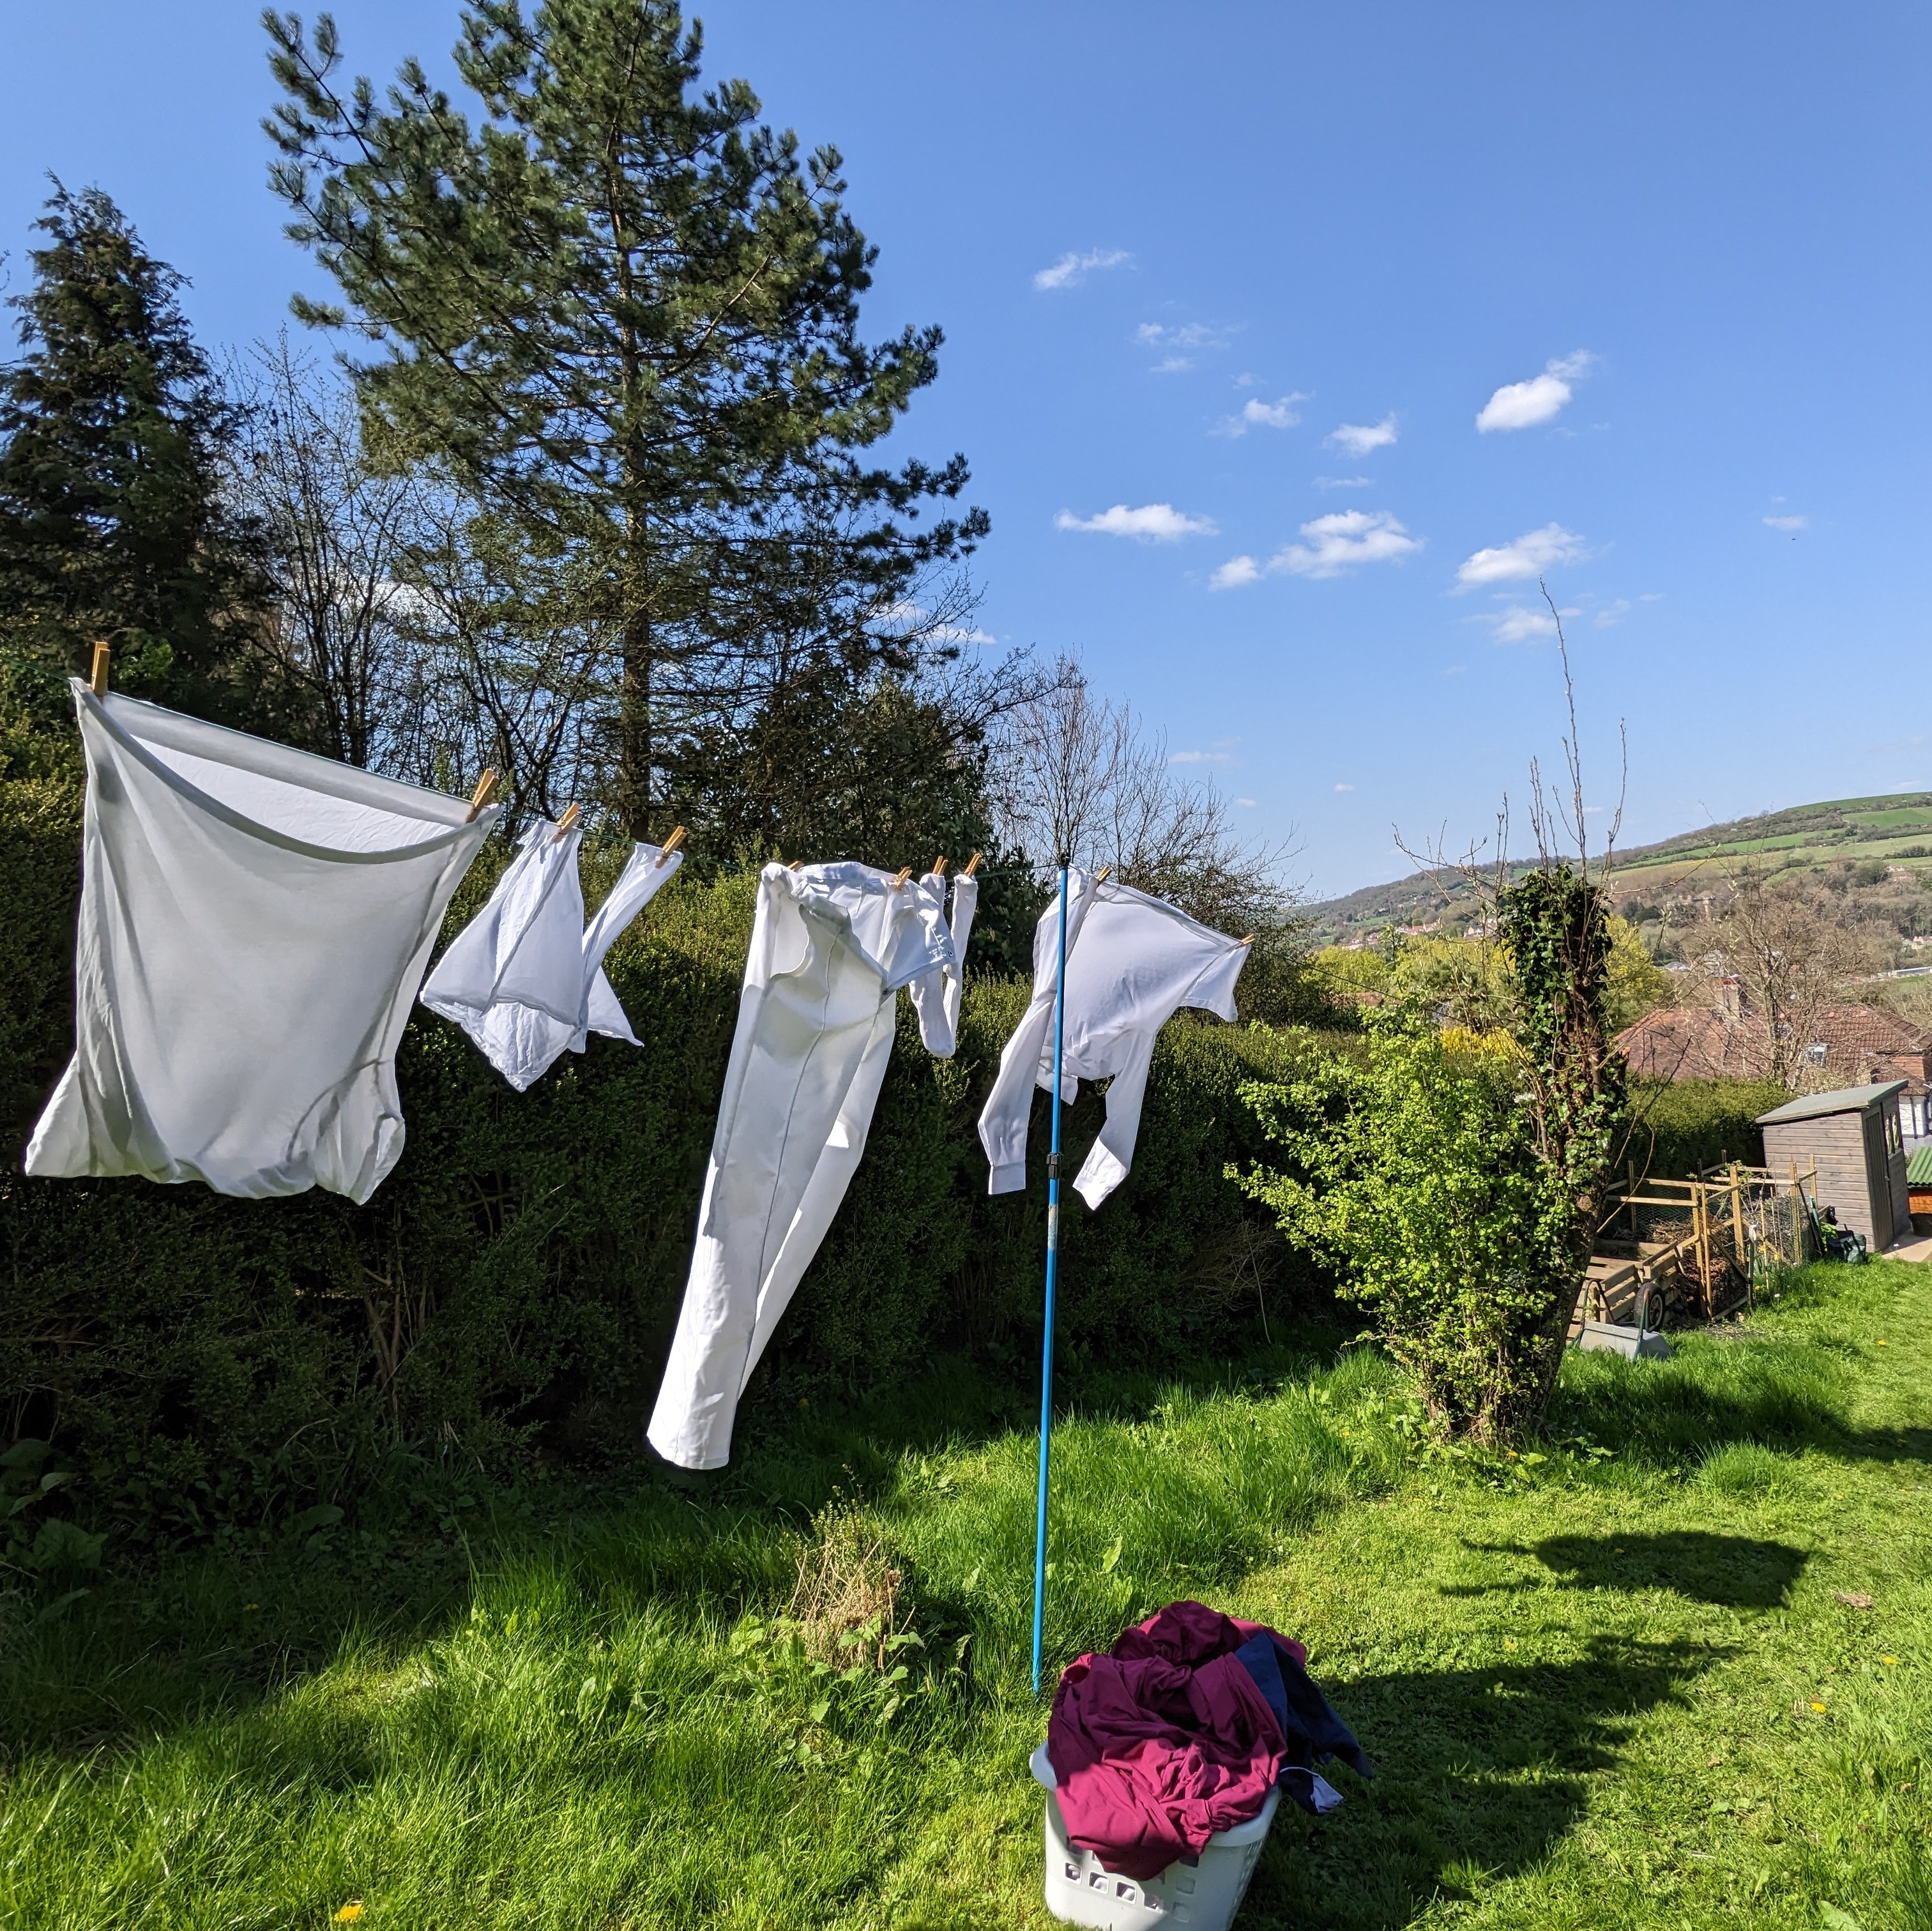 White kit hanging out to dry, with Little Solsbury hill in the background.